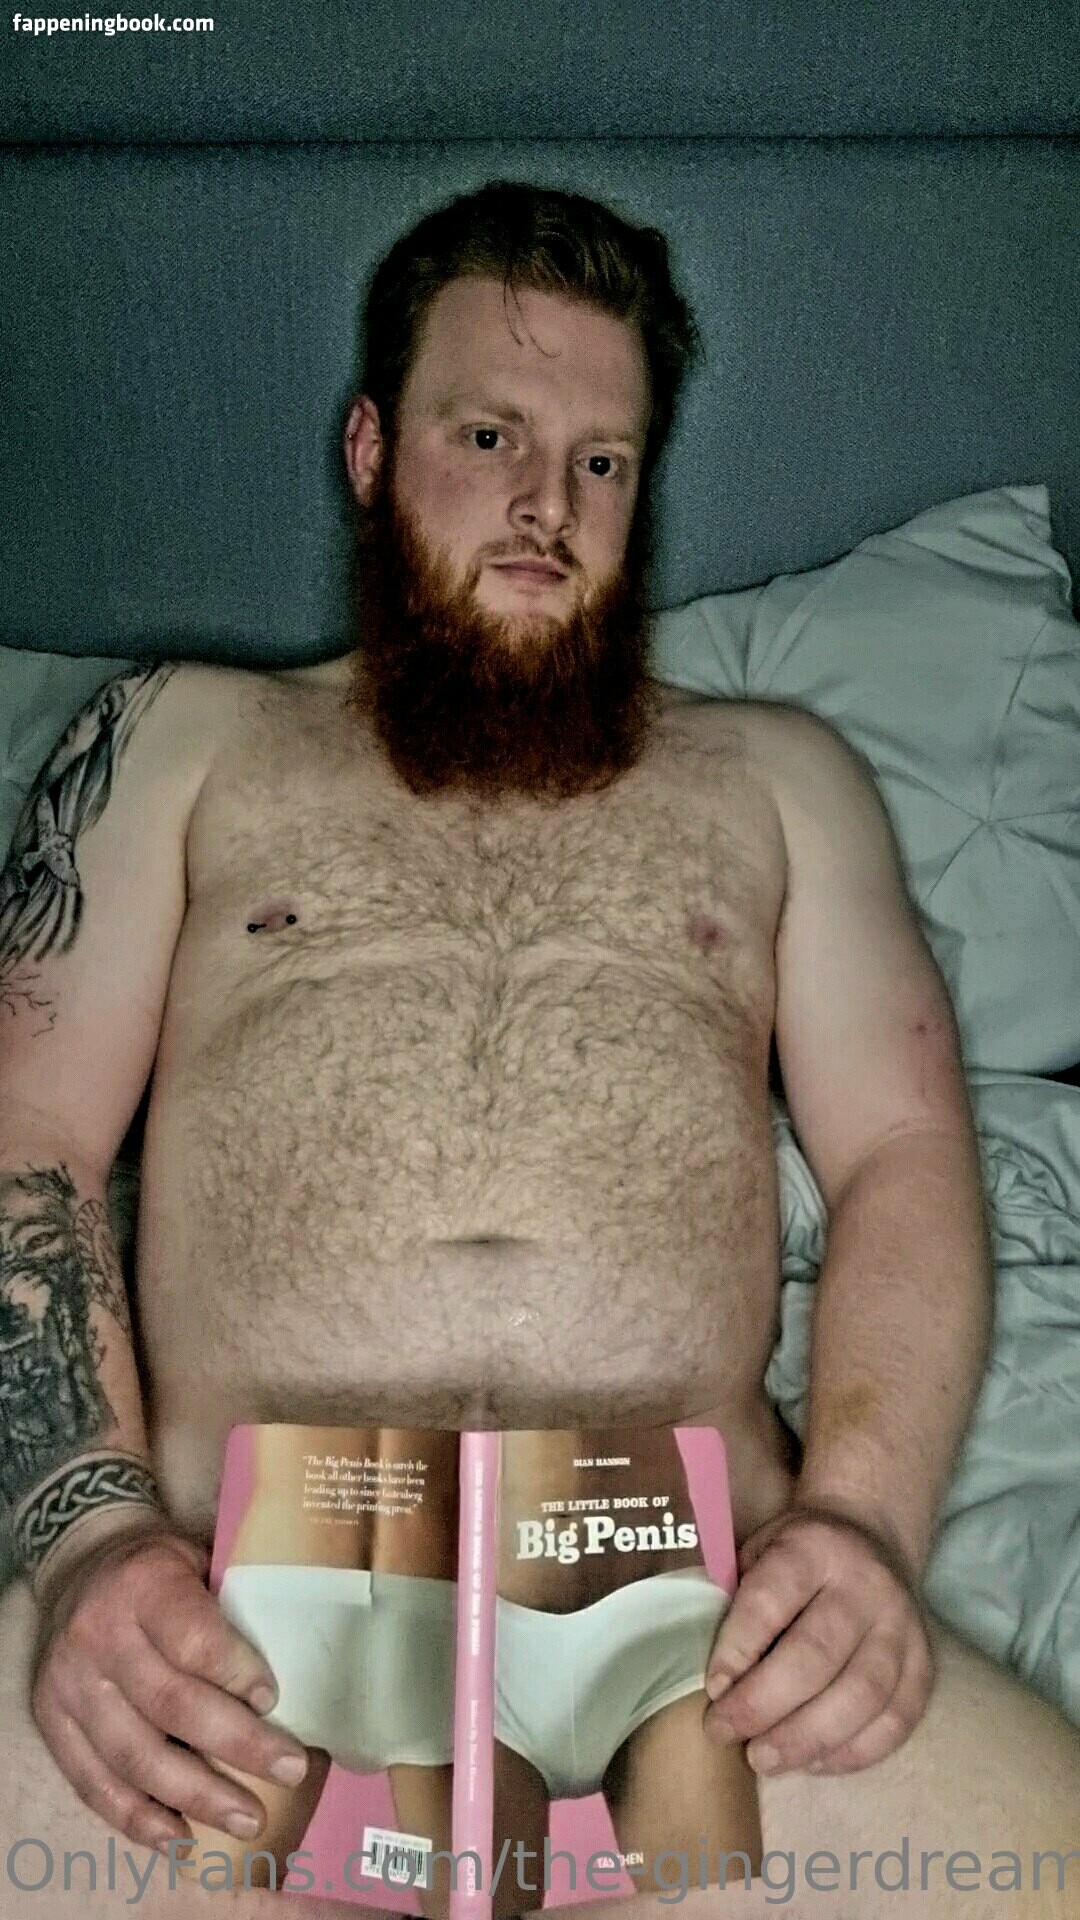 the-gingerdreamsicle Nude OnlyFans Leaks